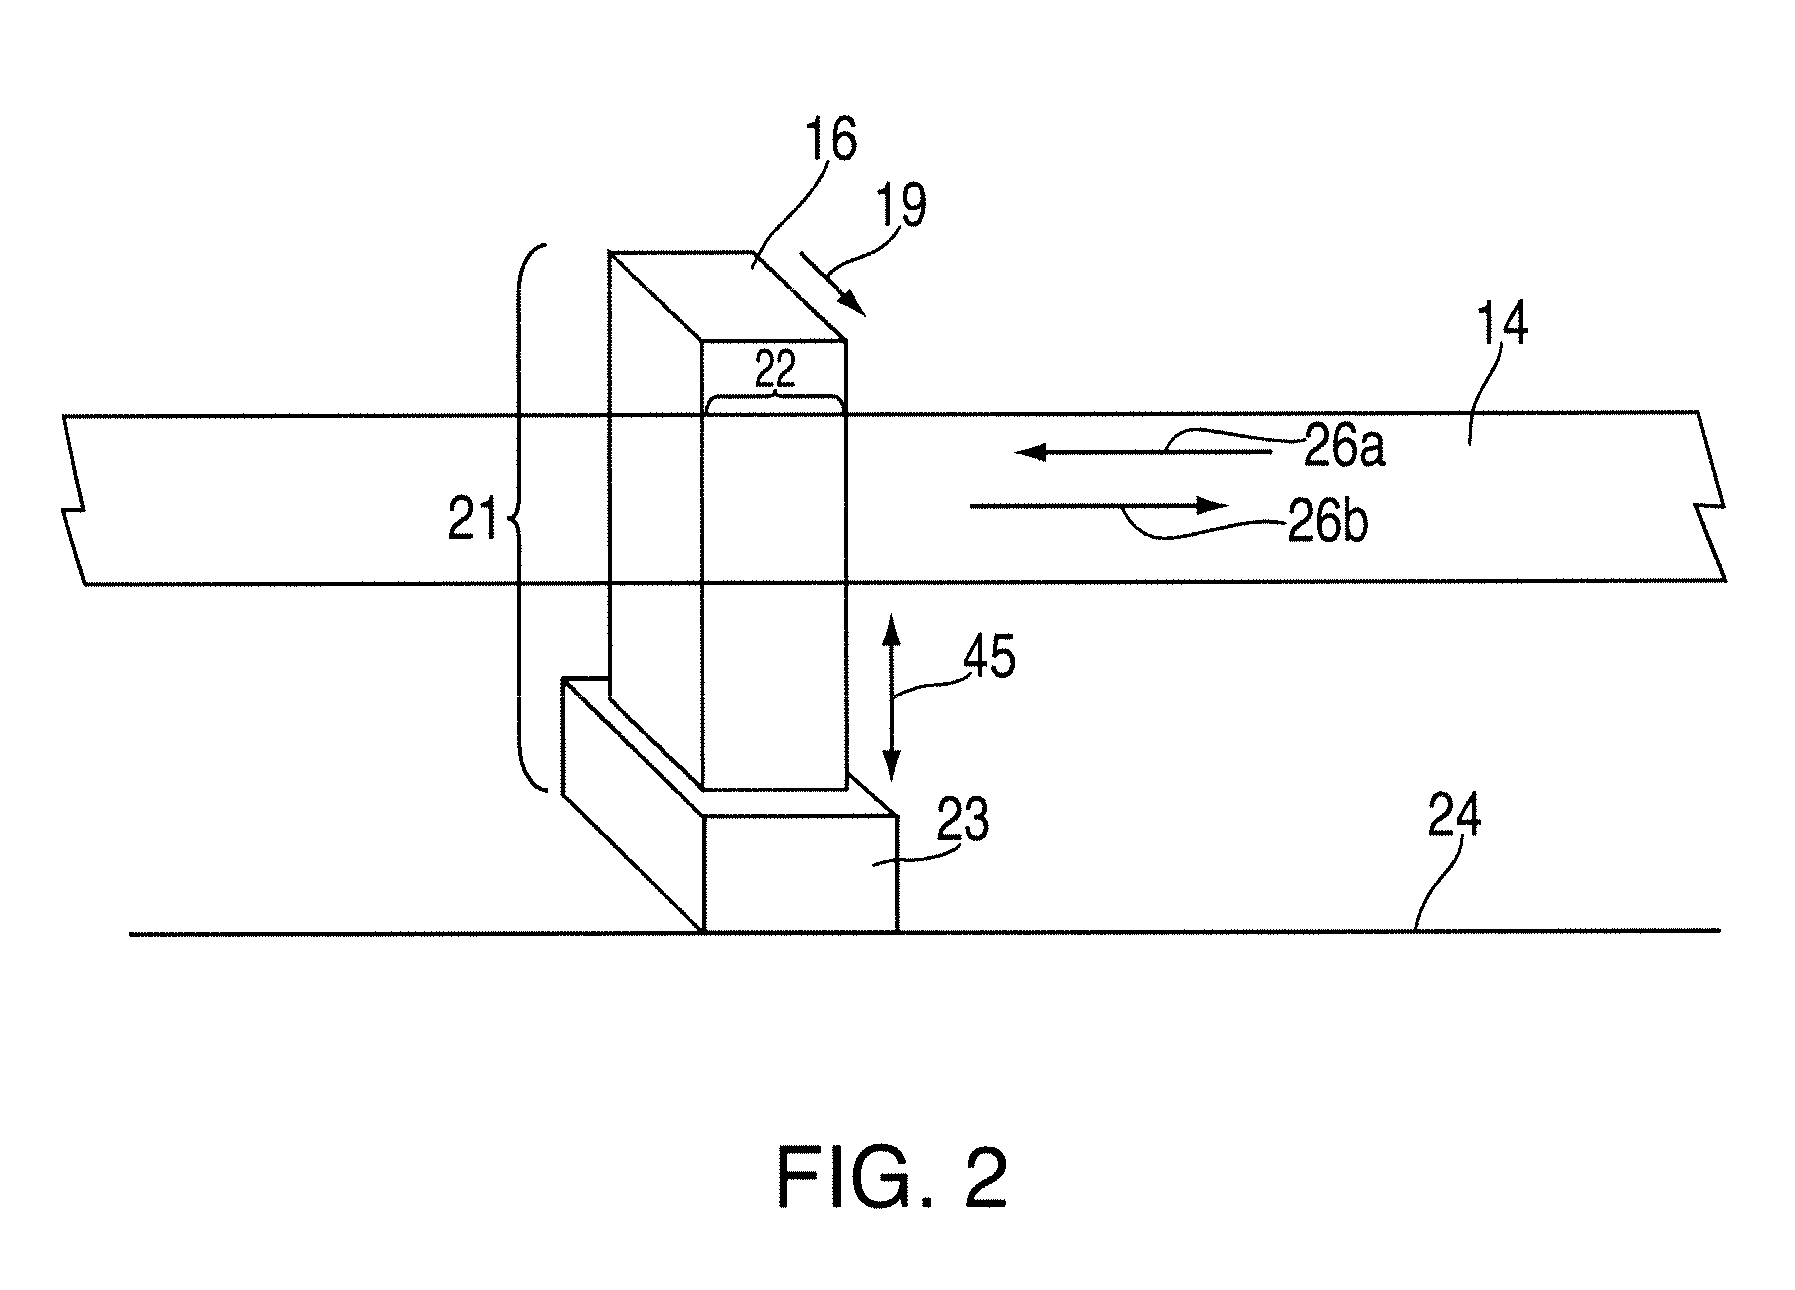 Method for reducing occurrences of tape stick conditions in magnetic tape